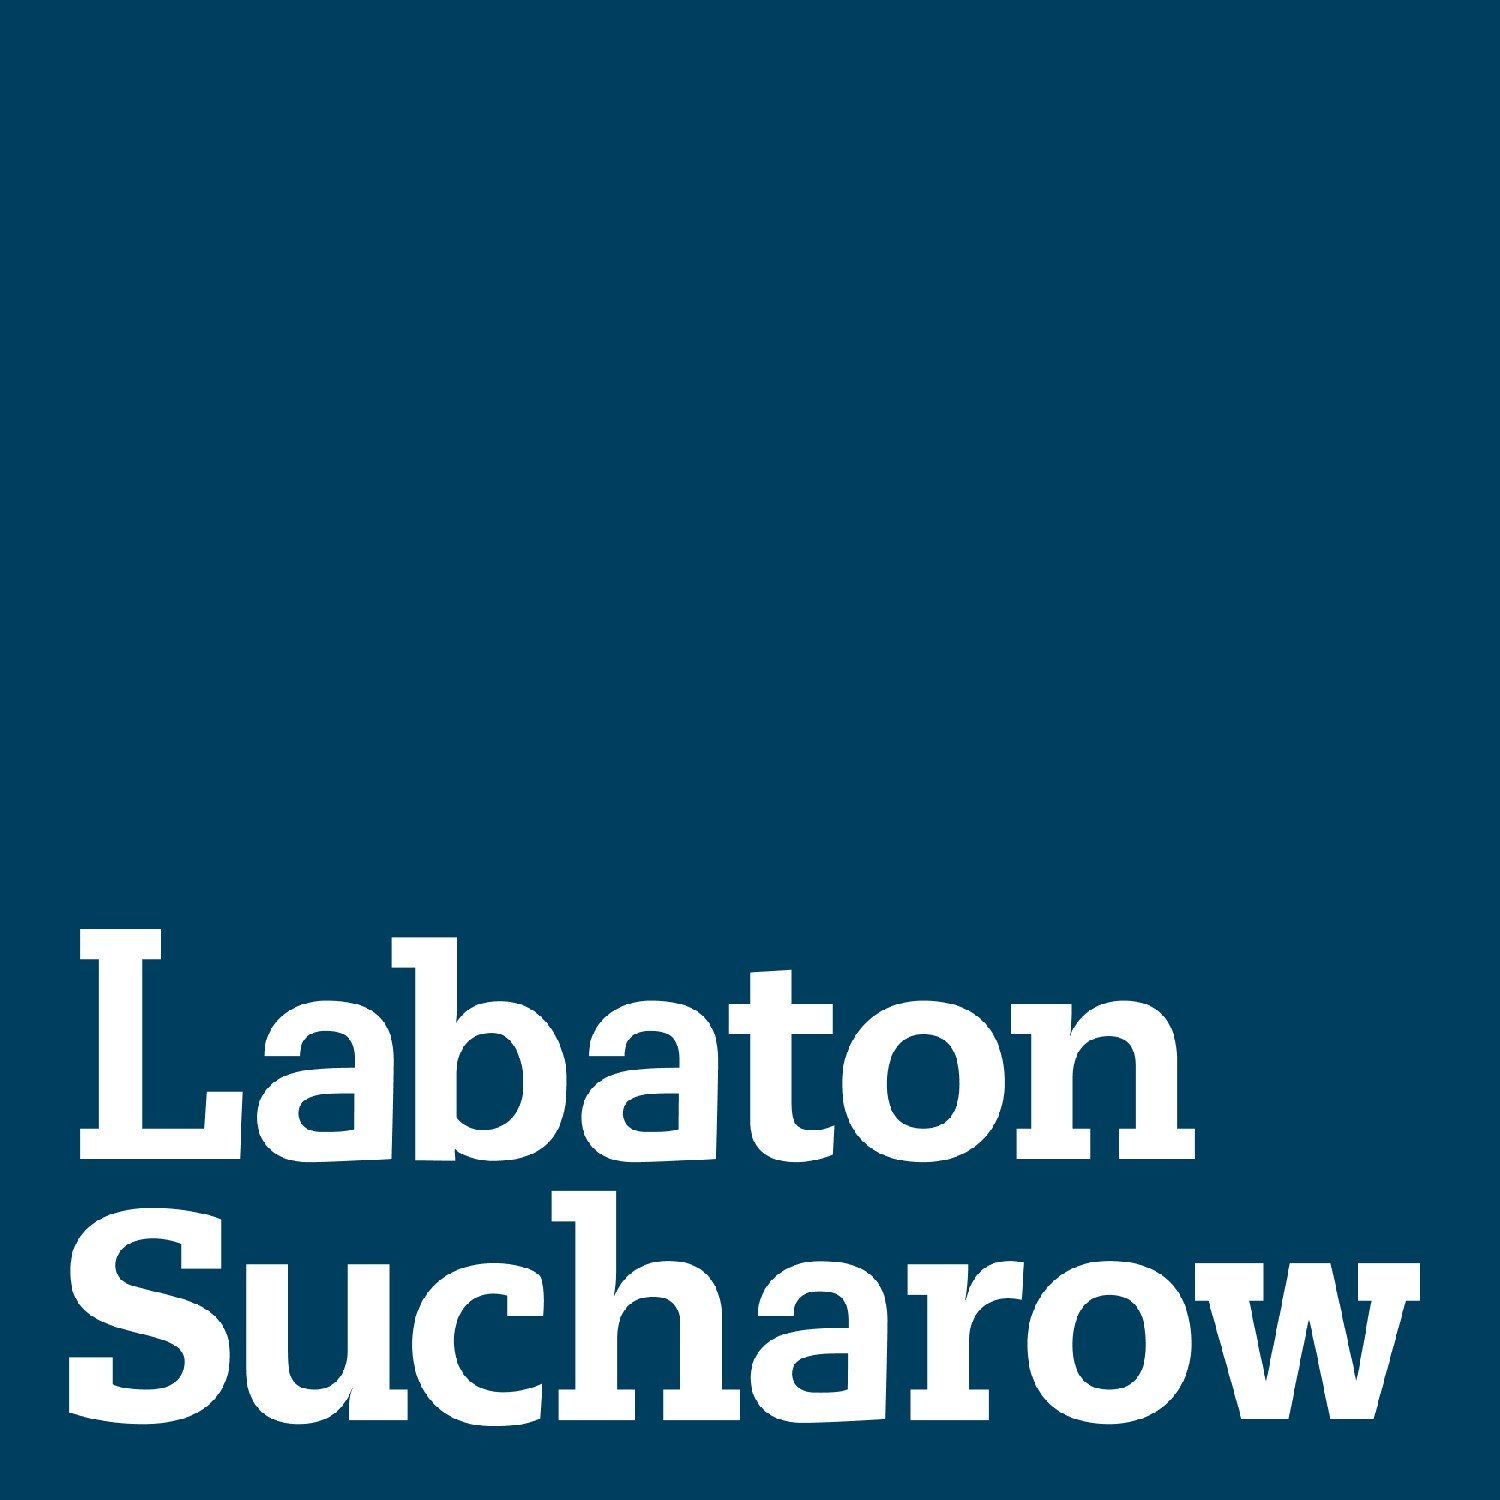 Labaton Sucharow LLP, Tuesday, May 5, 2020, Press release picture